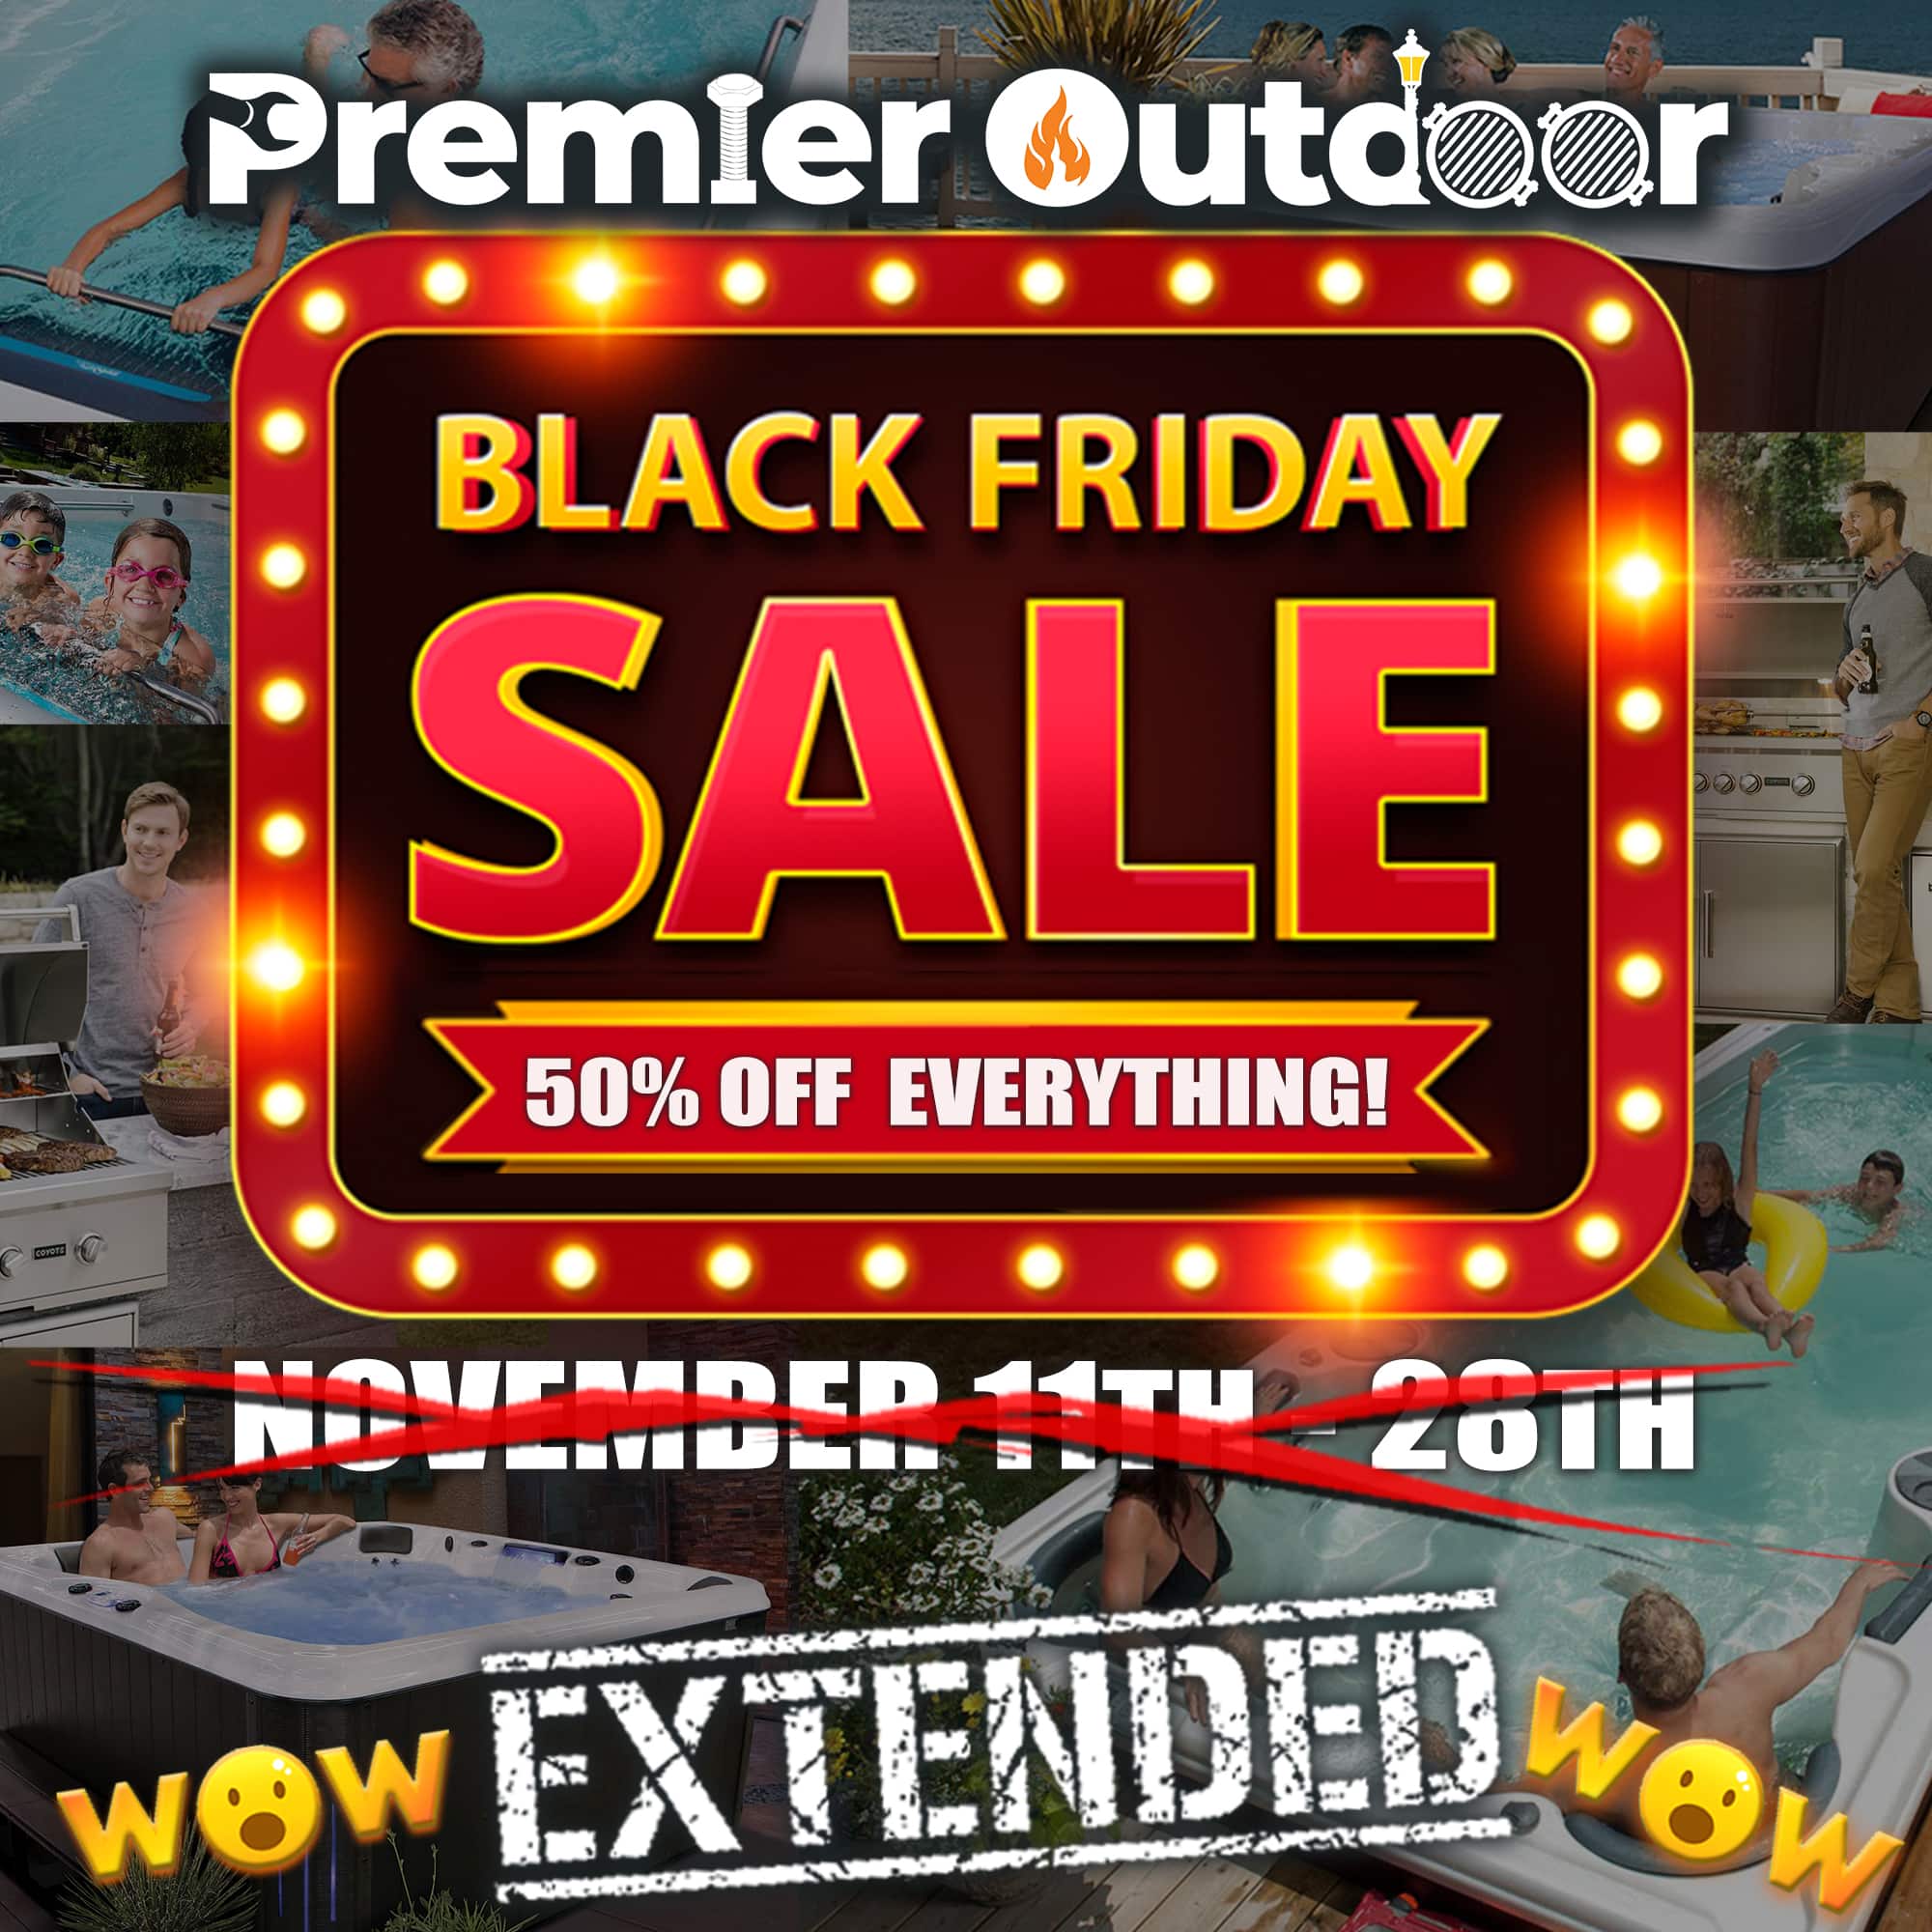 Premier Outdoor USA black friday mobile SQ AD DATES EXT